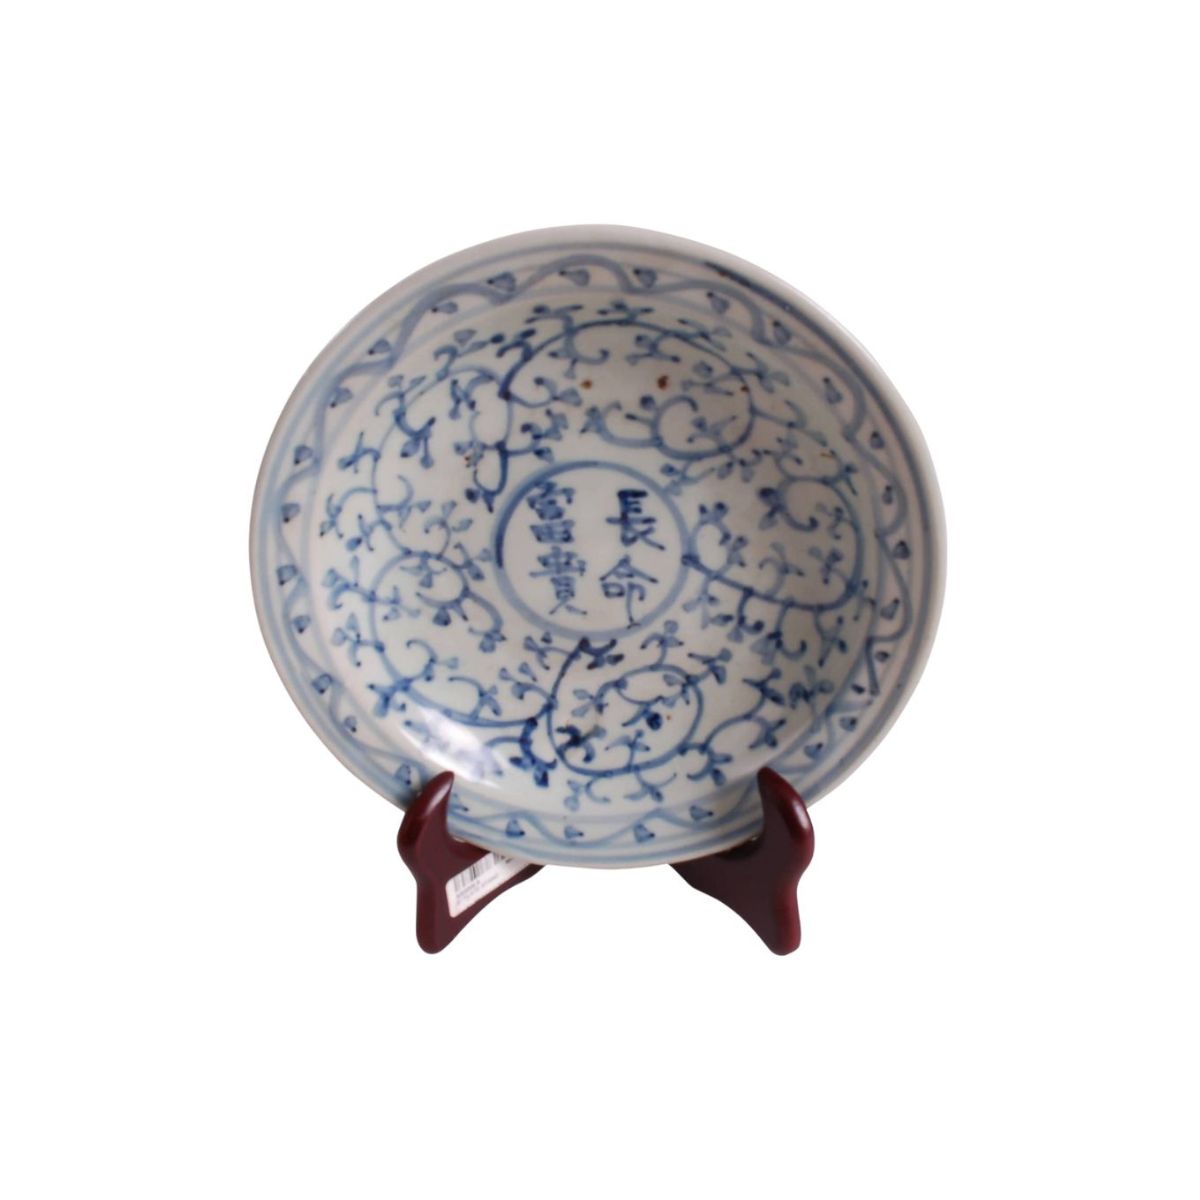 Blue and White Chinese Porcelain Plate, Floral Design